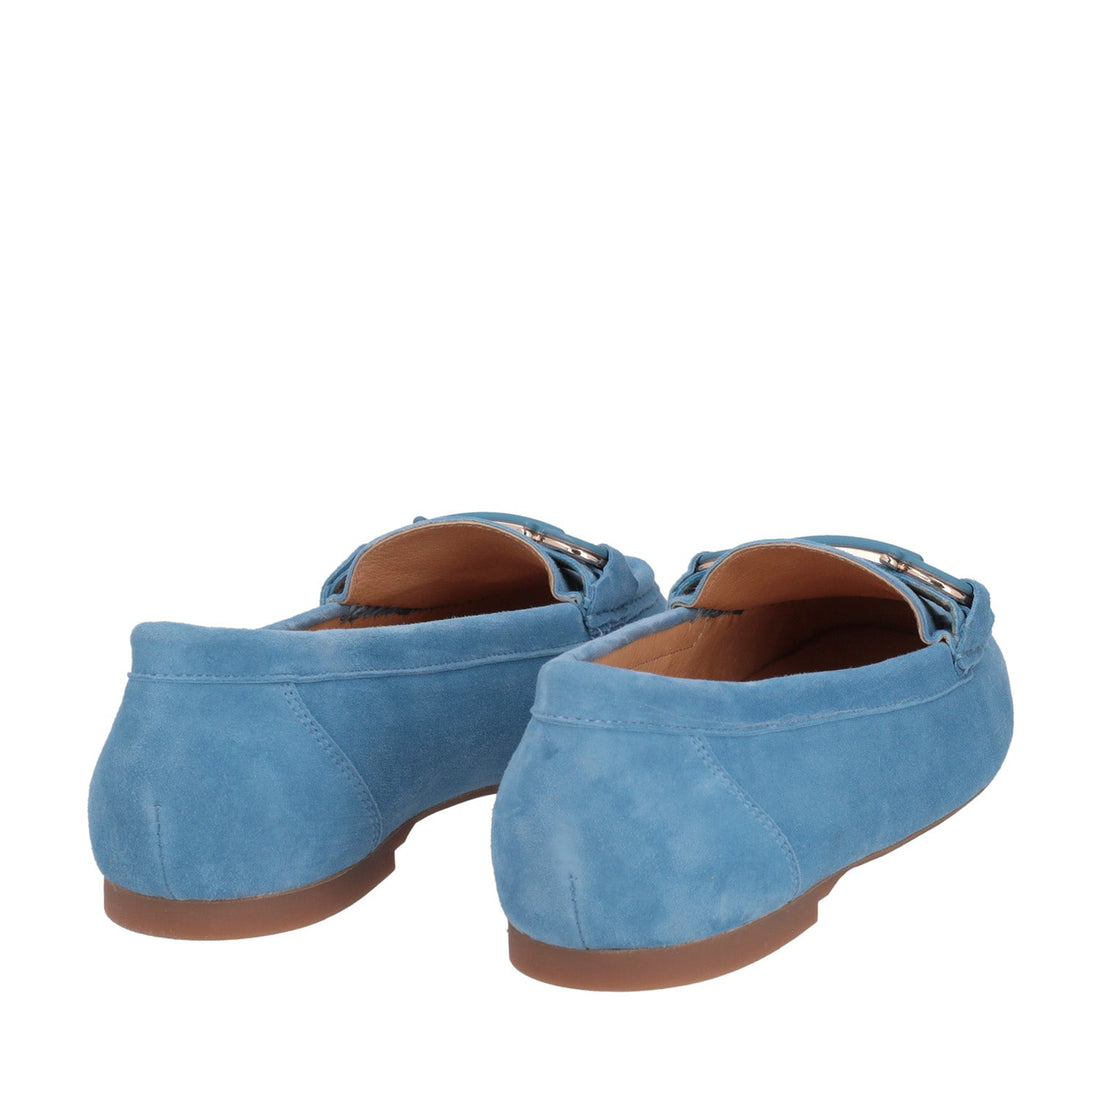 LIGHT BLUE CARMEN LEATHER MOCCASIN WITH CLAMP